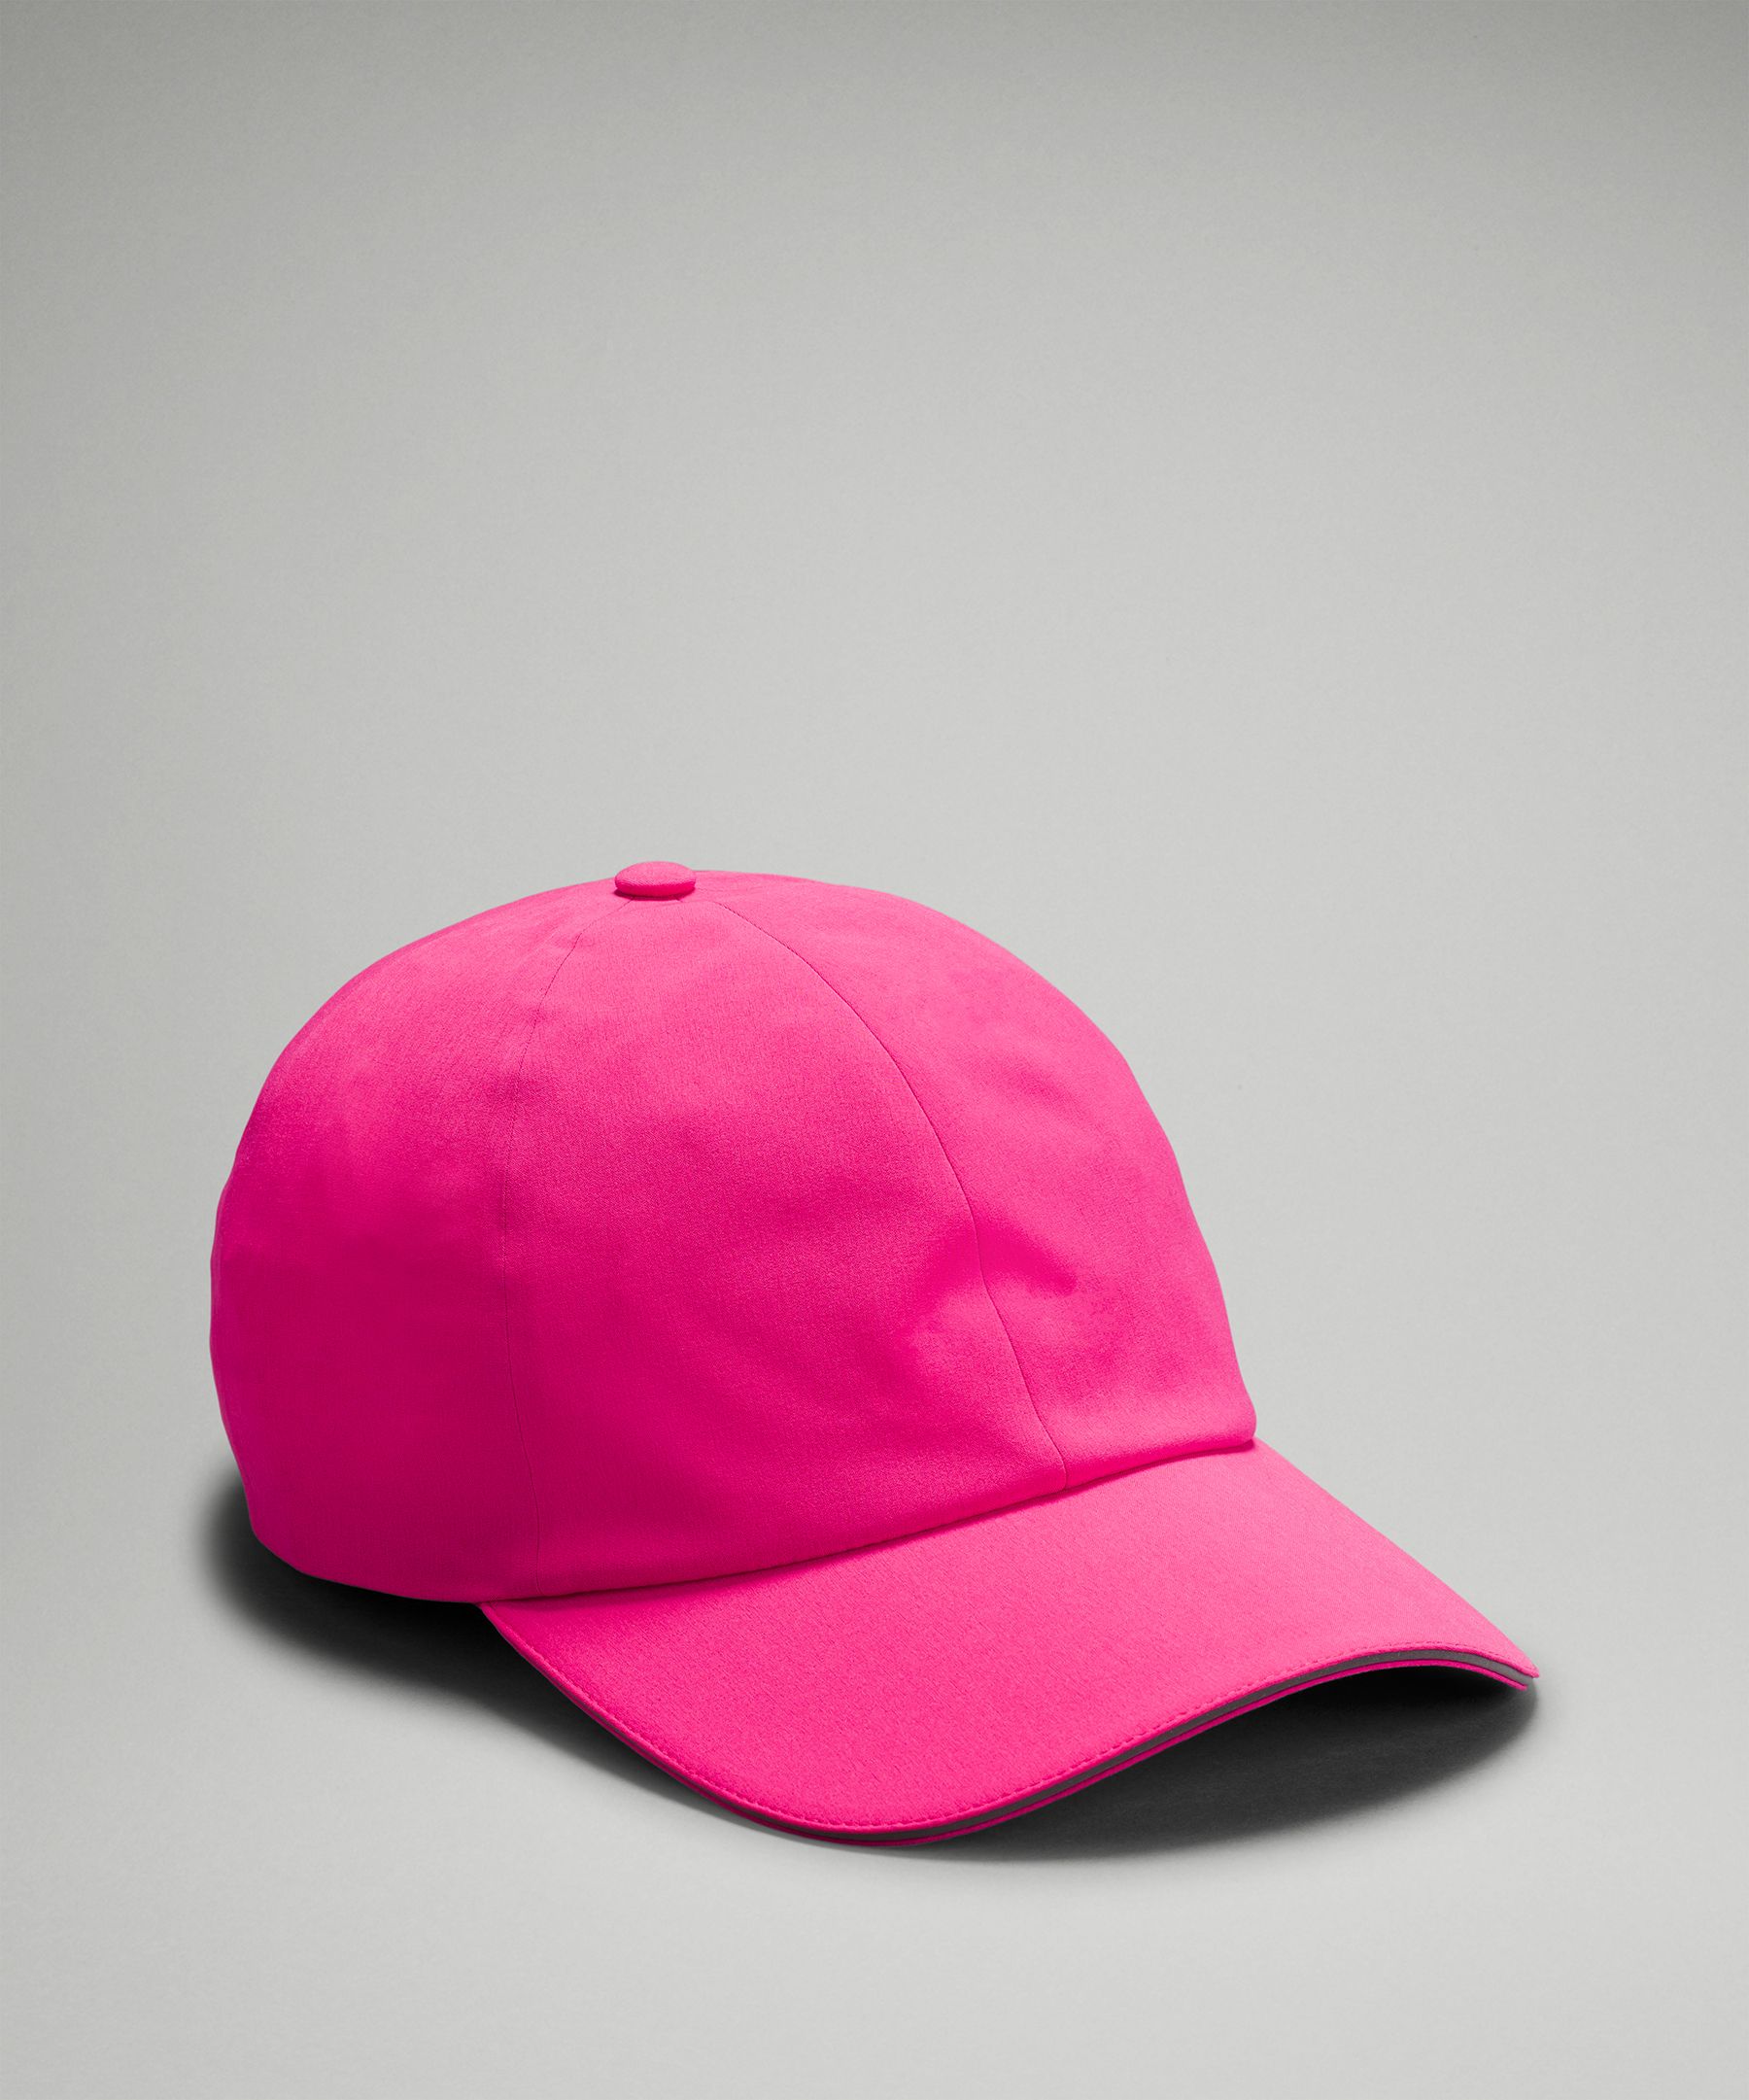 Women's Fast and Free Running Hat, Women's Hats